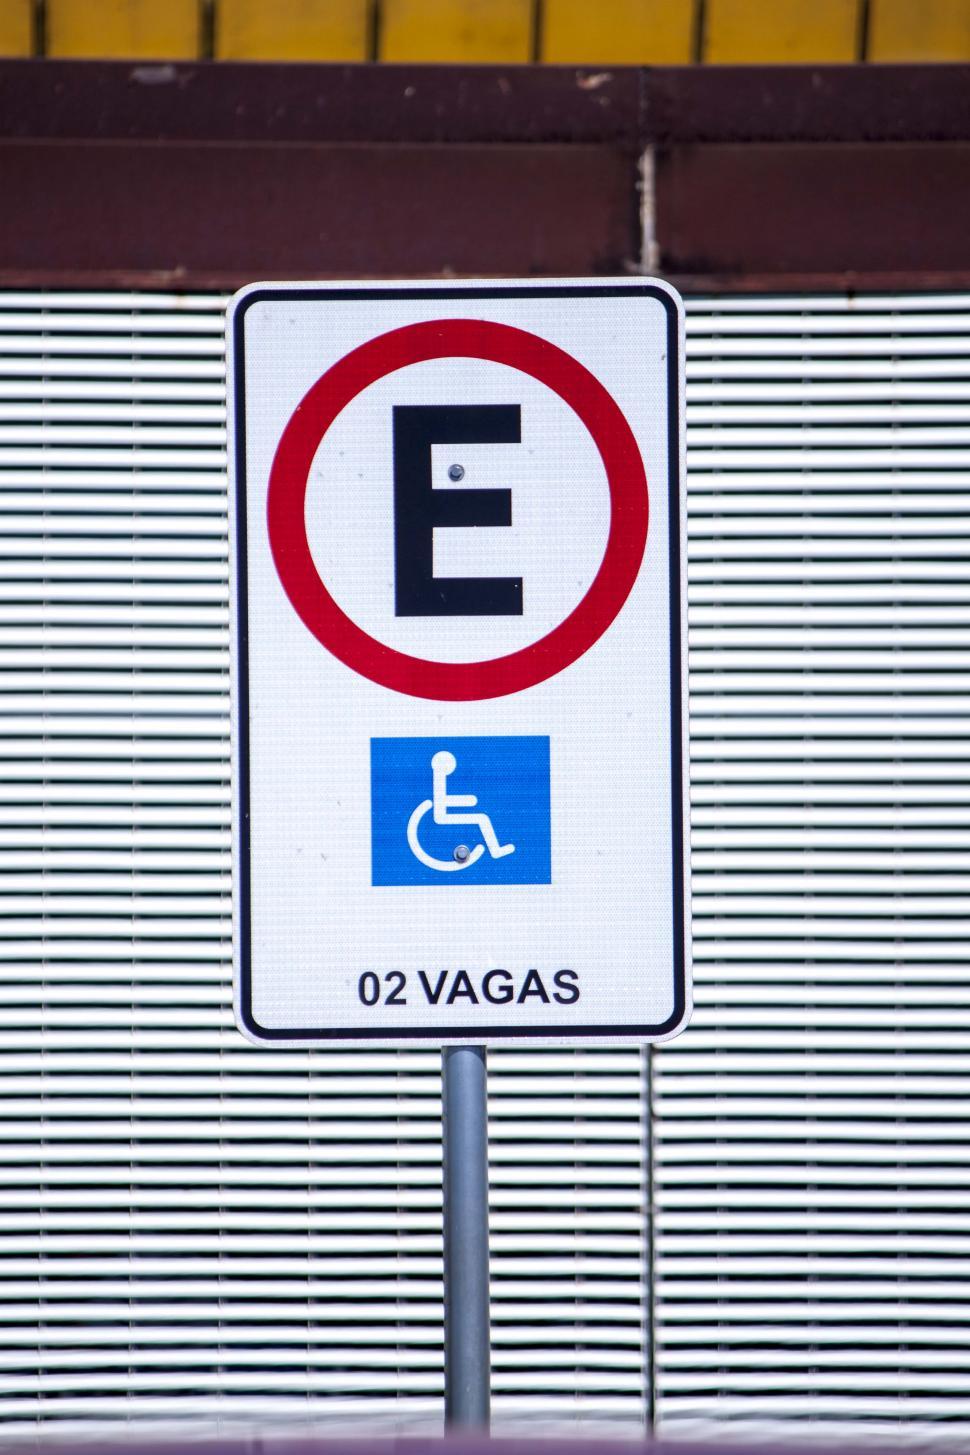 Free Image of Handicap parking only 